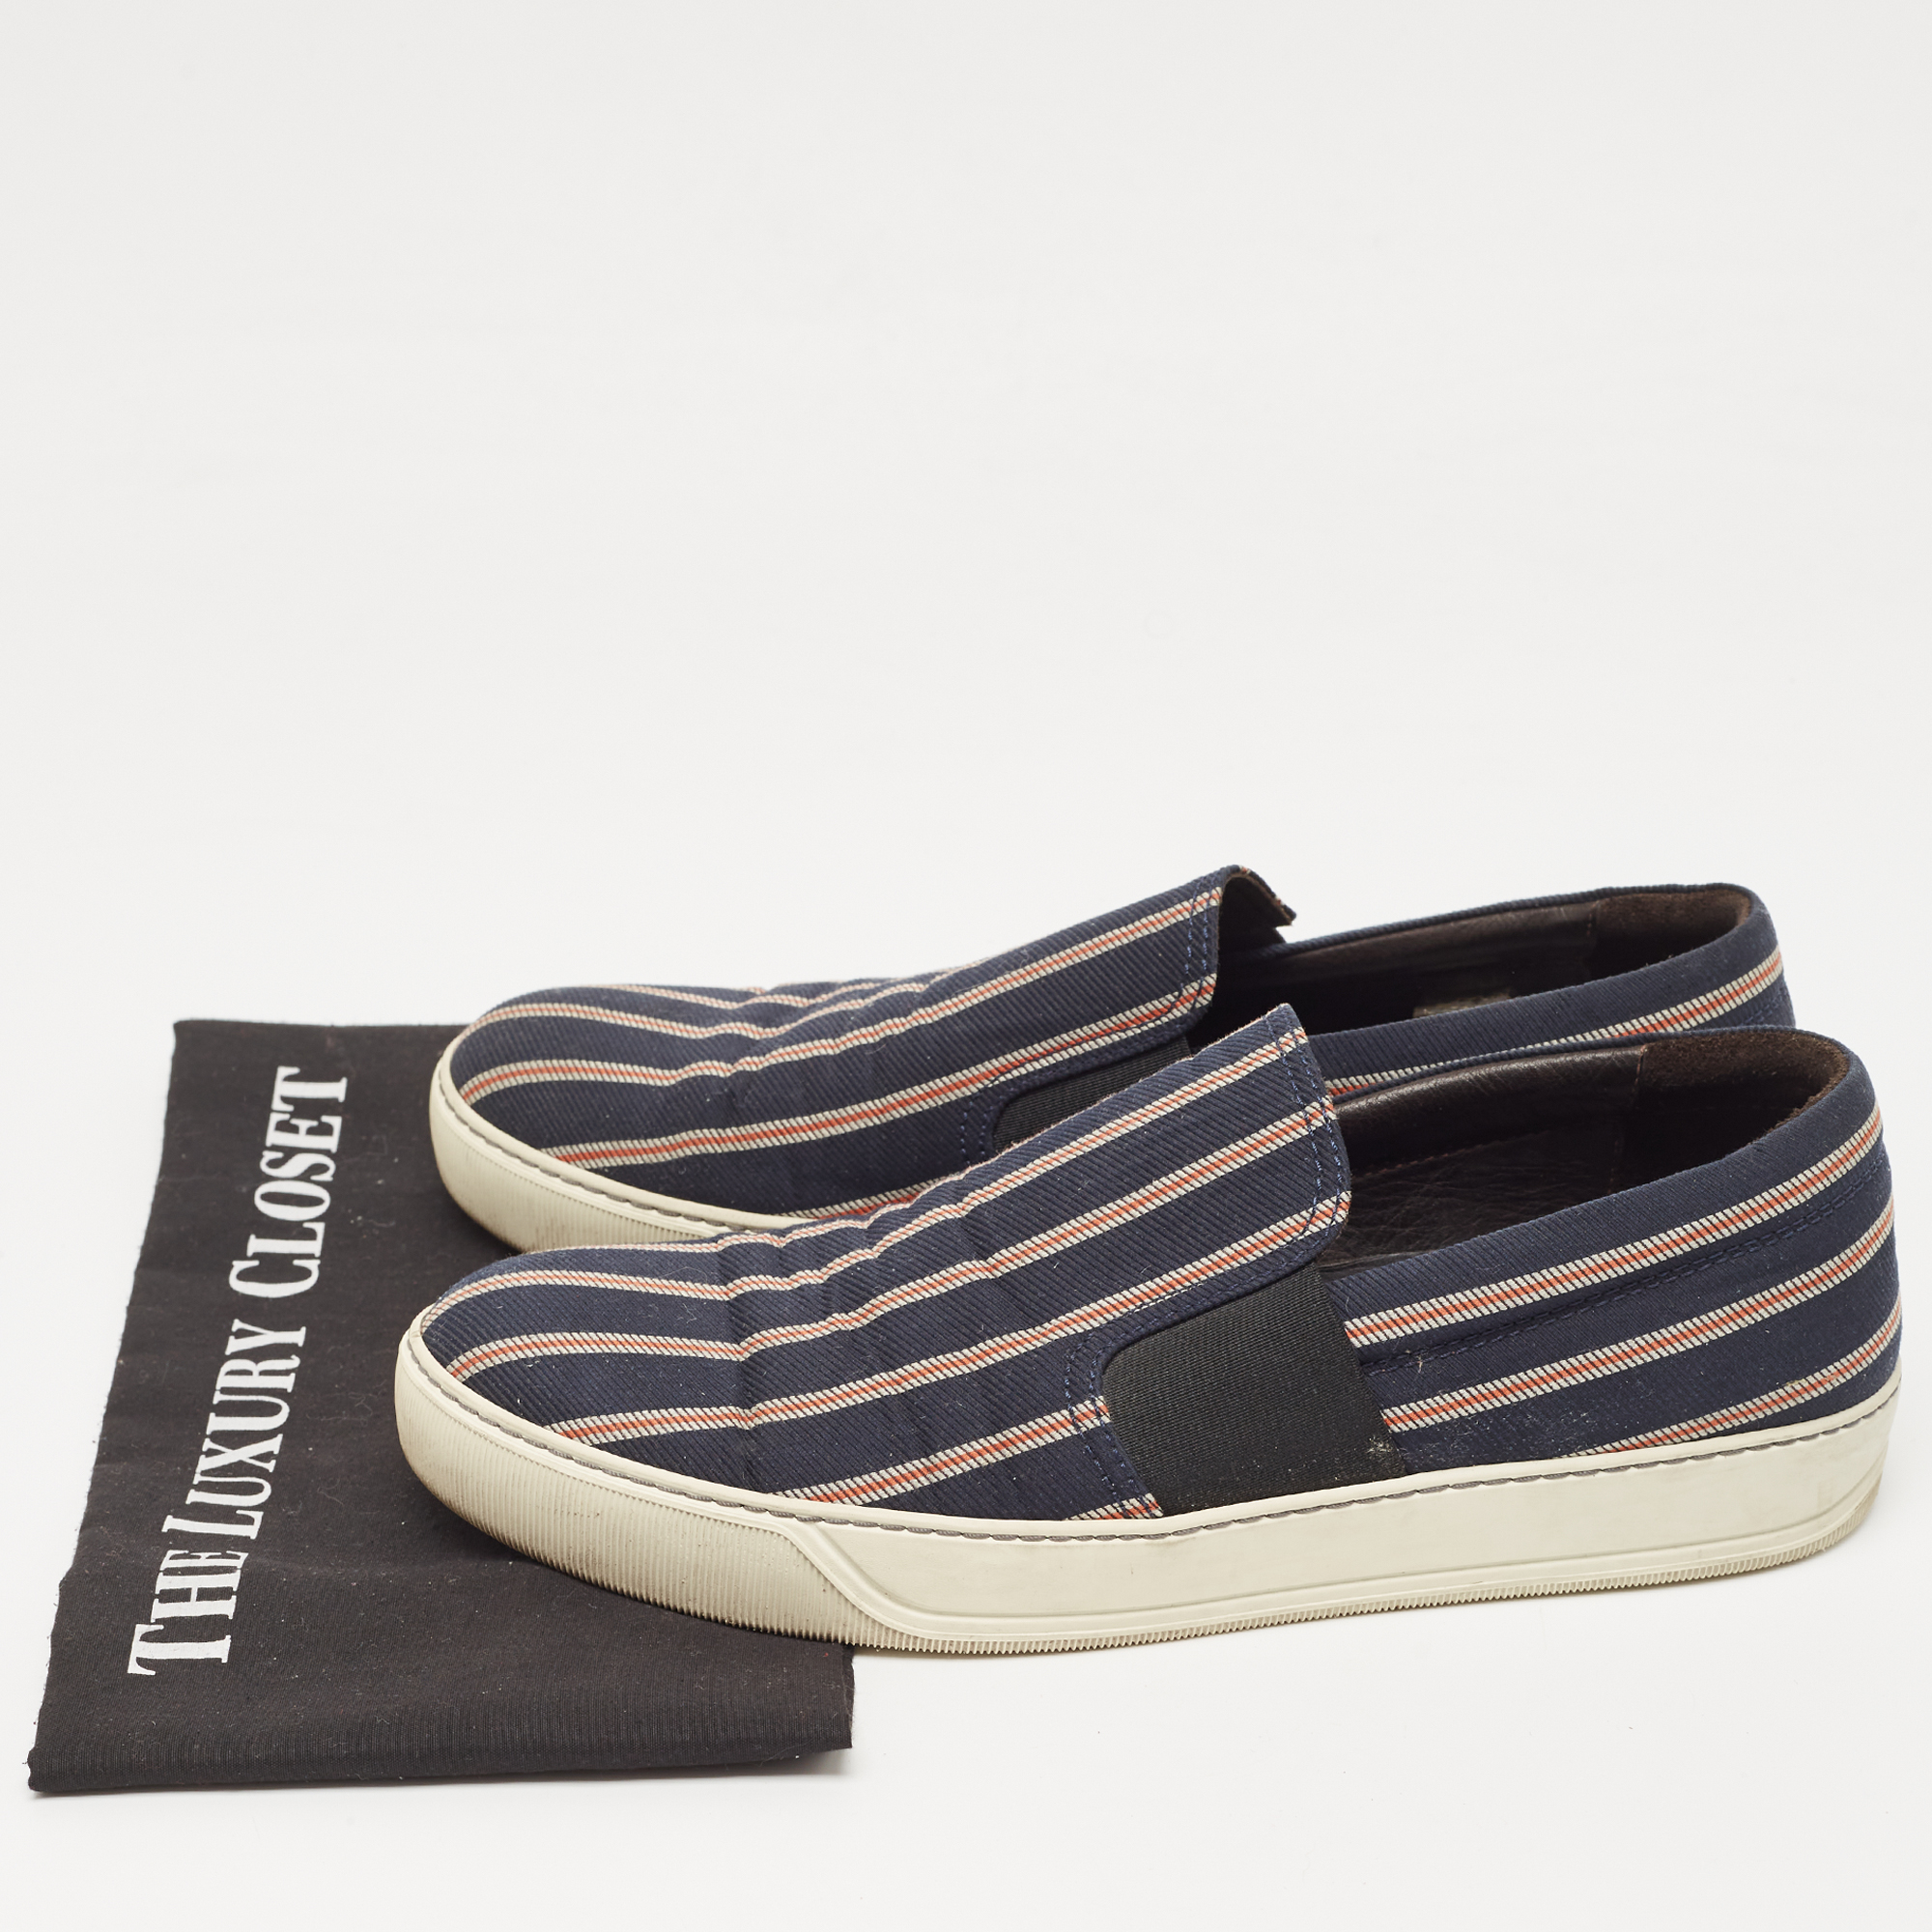 Lanvin Navy Blue Printed Fabric Slip On Sneakers Size 42